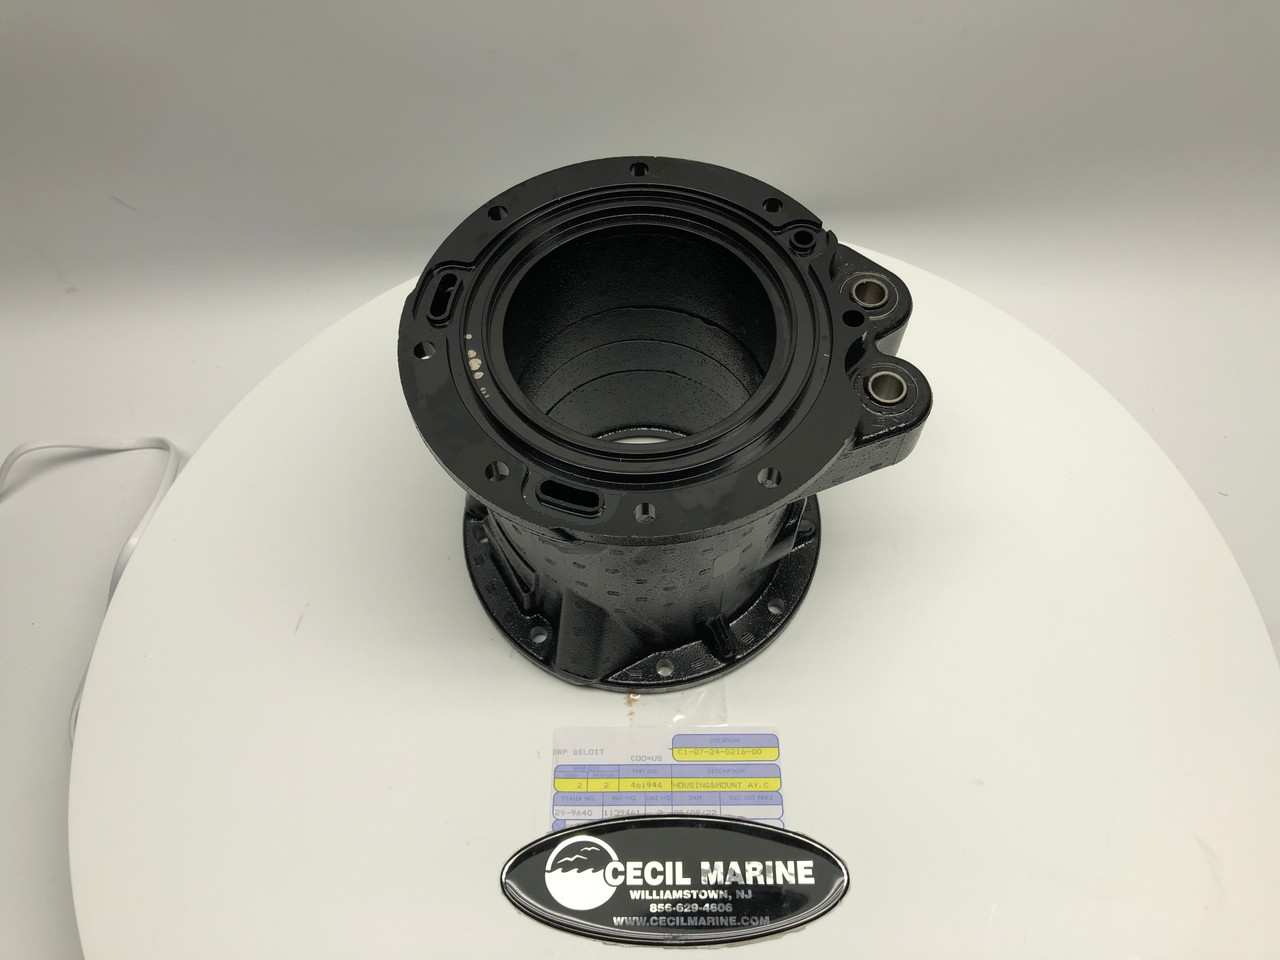 $488.22* GENUINE BRP no tax* Center Housing, Catalys *In Stock & Ready To Ship!